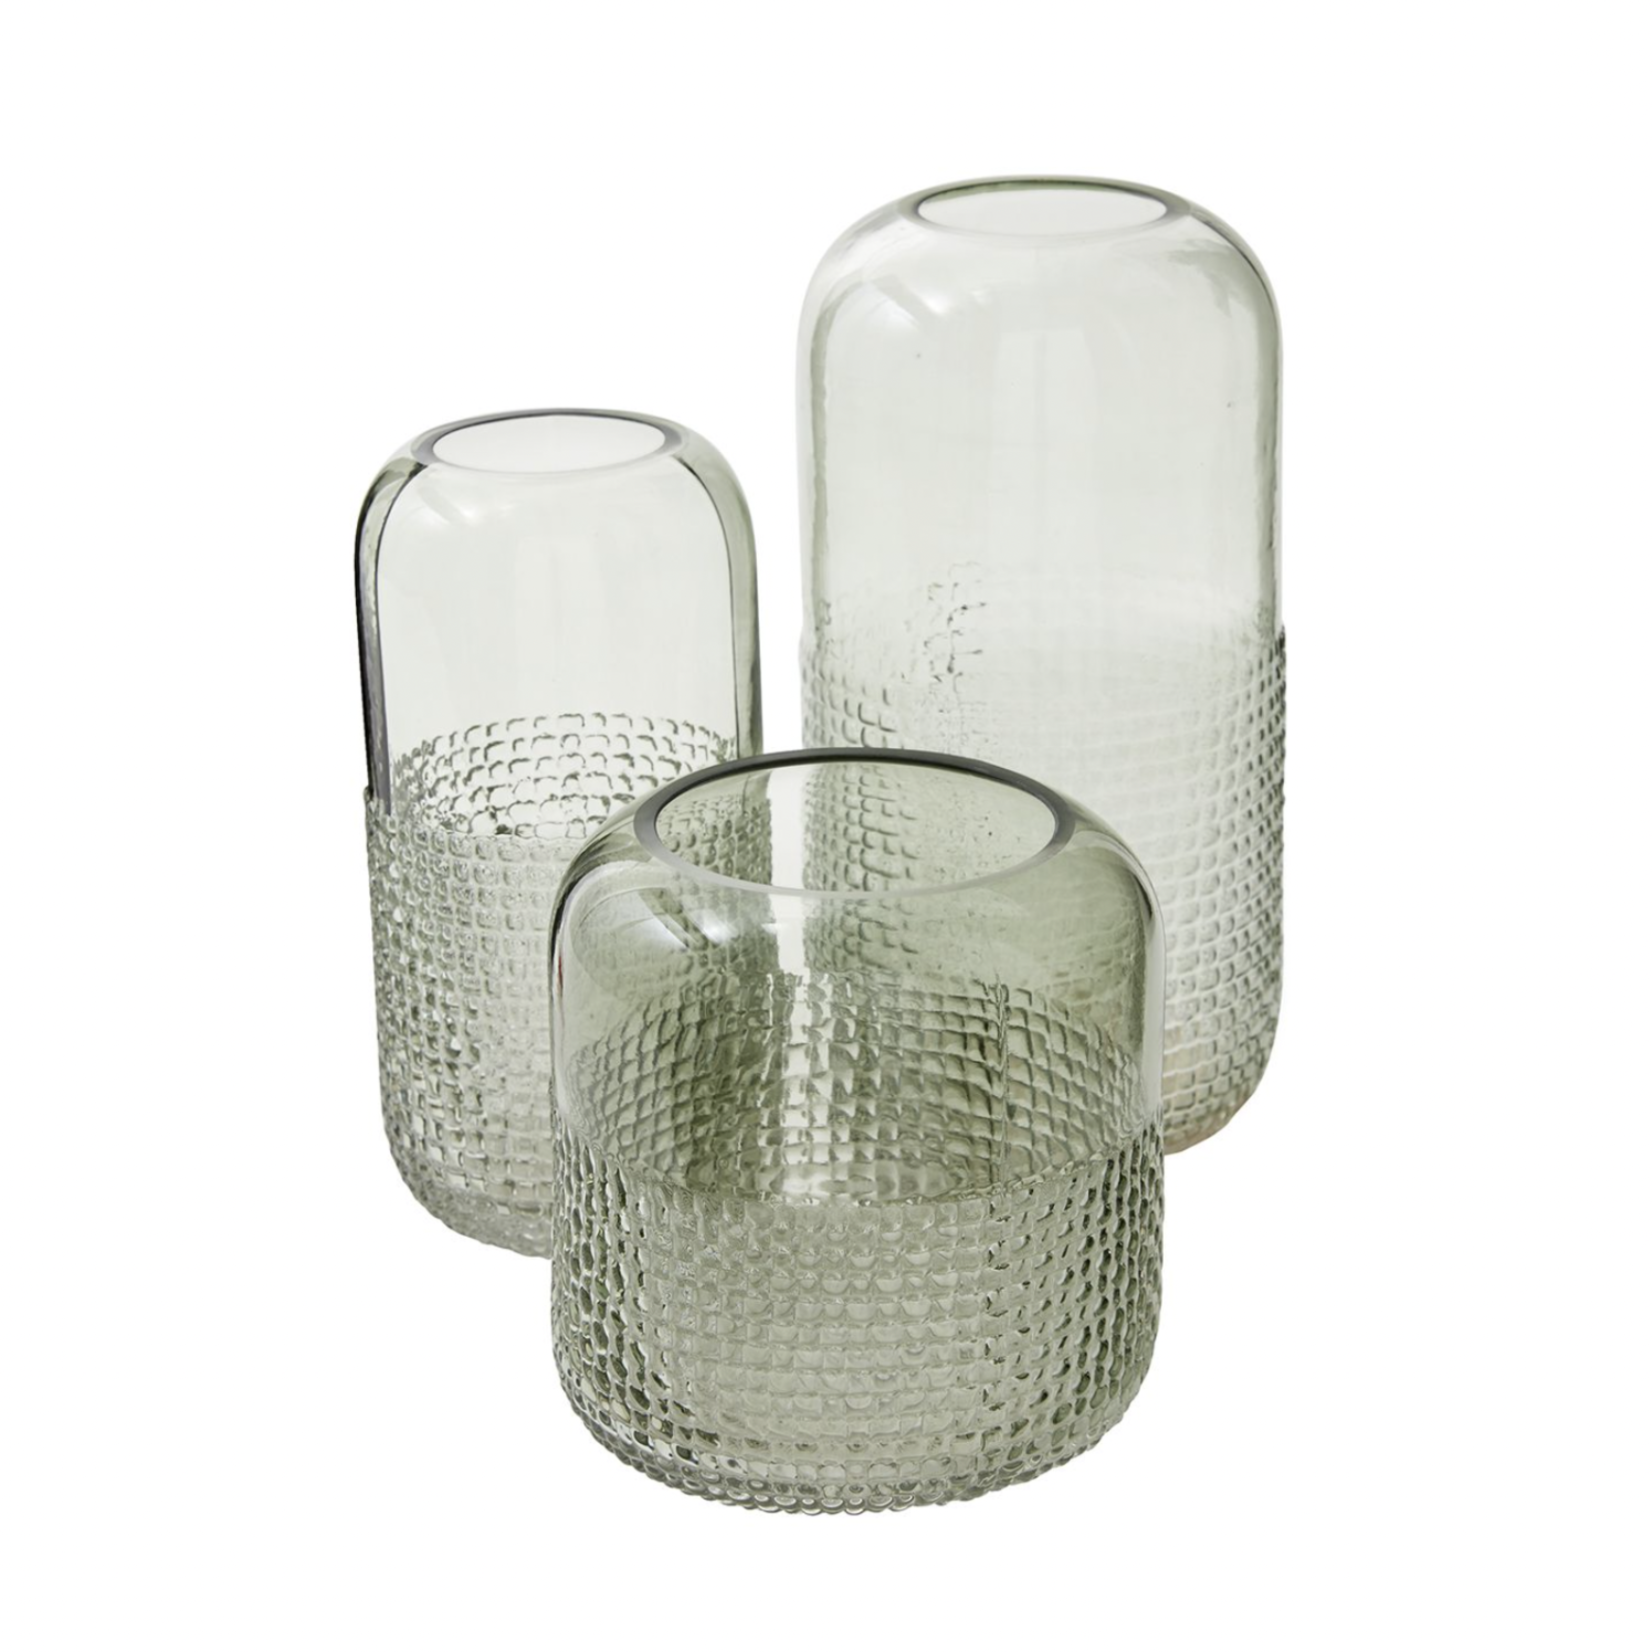 50% off was $21 now $10.50, 12”H X 6.25” CLEREL GLASS VASE (AD)